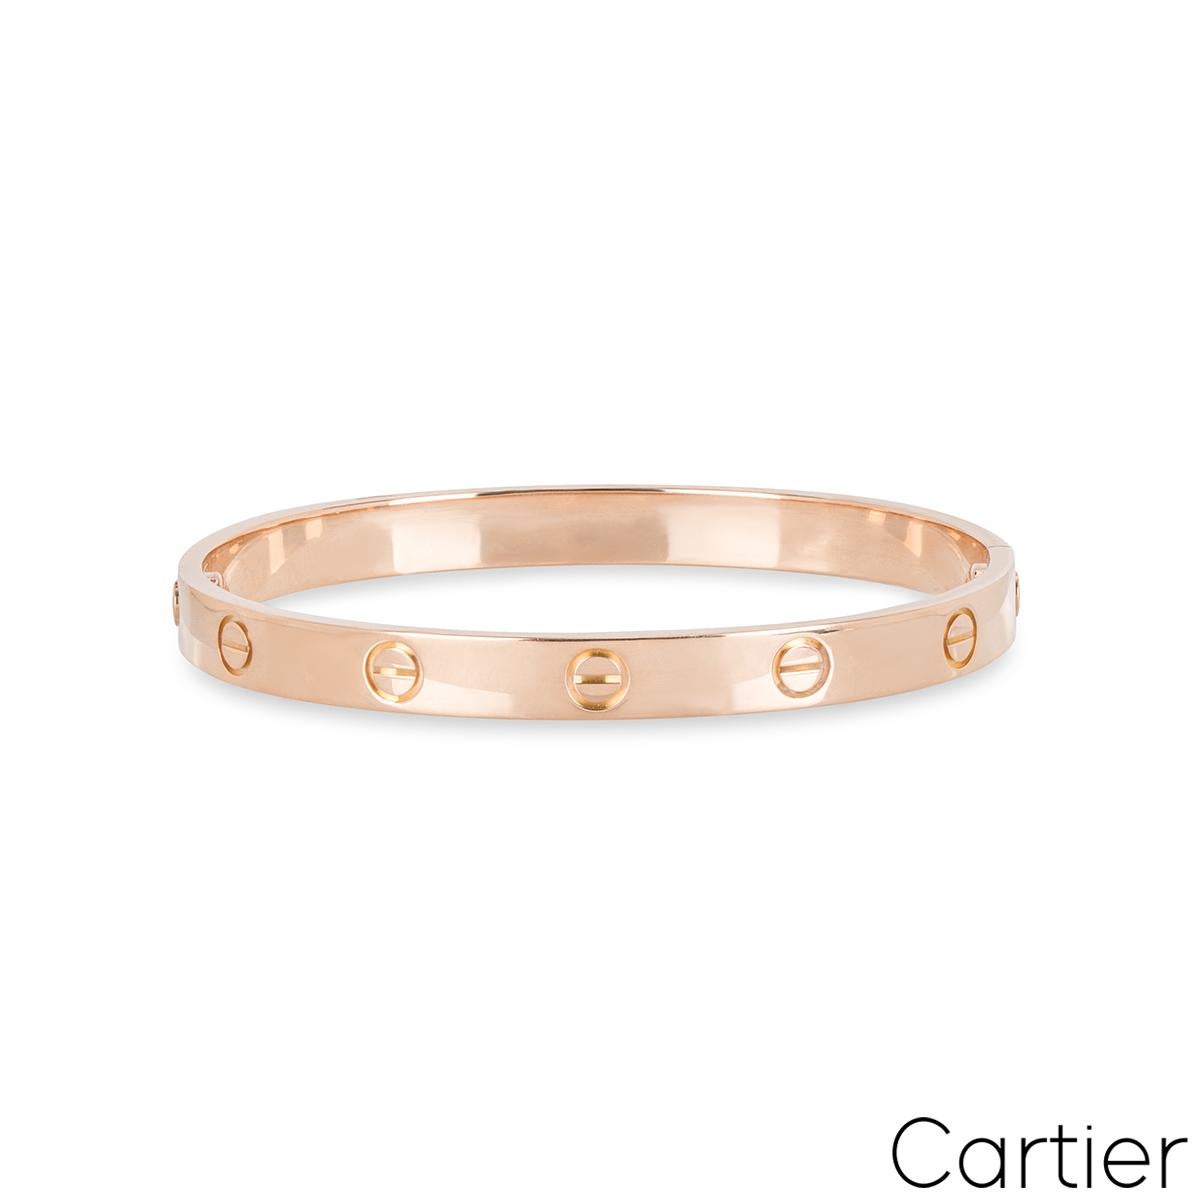 Cartier Rose Gold Plain Love Bracelet Size 20 B6035620 In Excellent Condition For Sale In London, GB